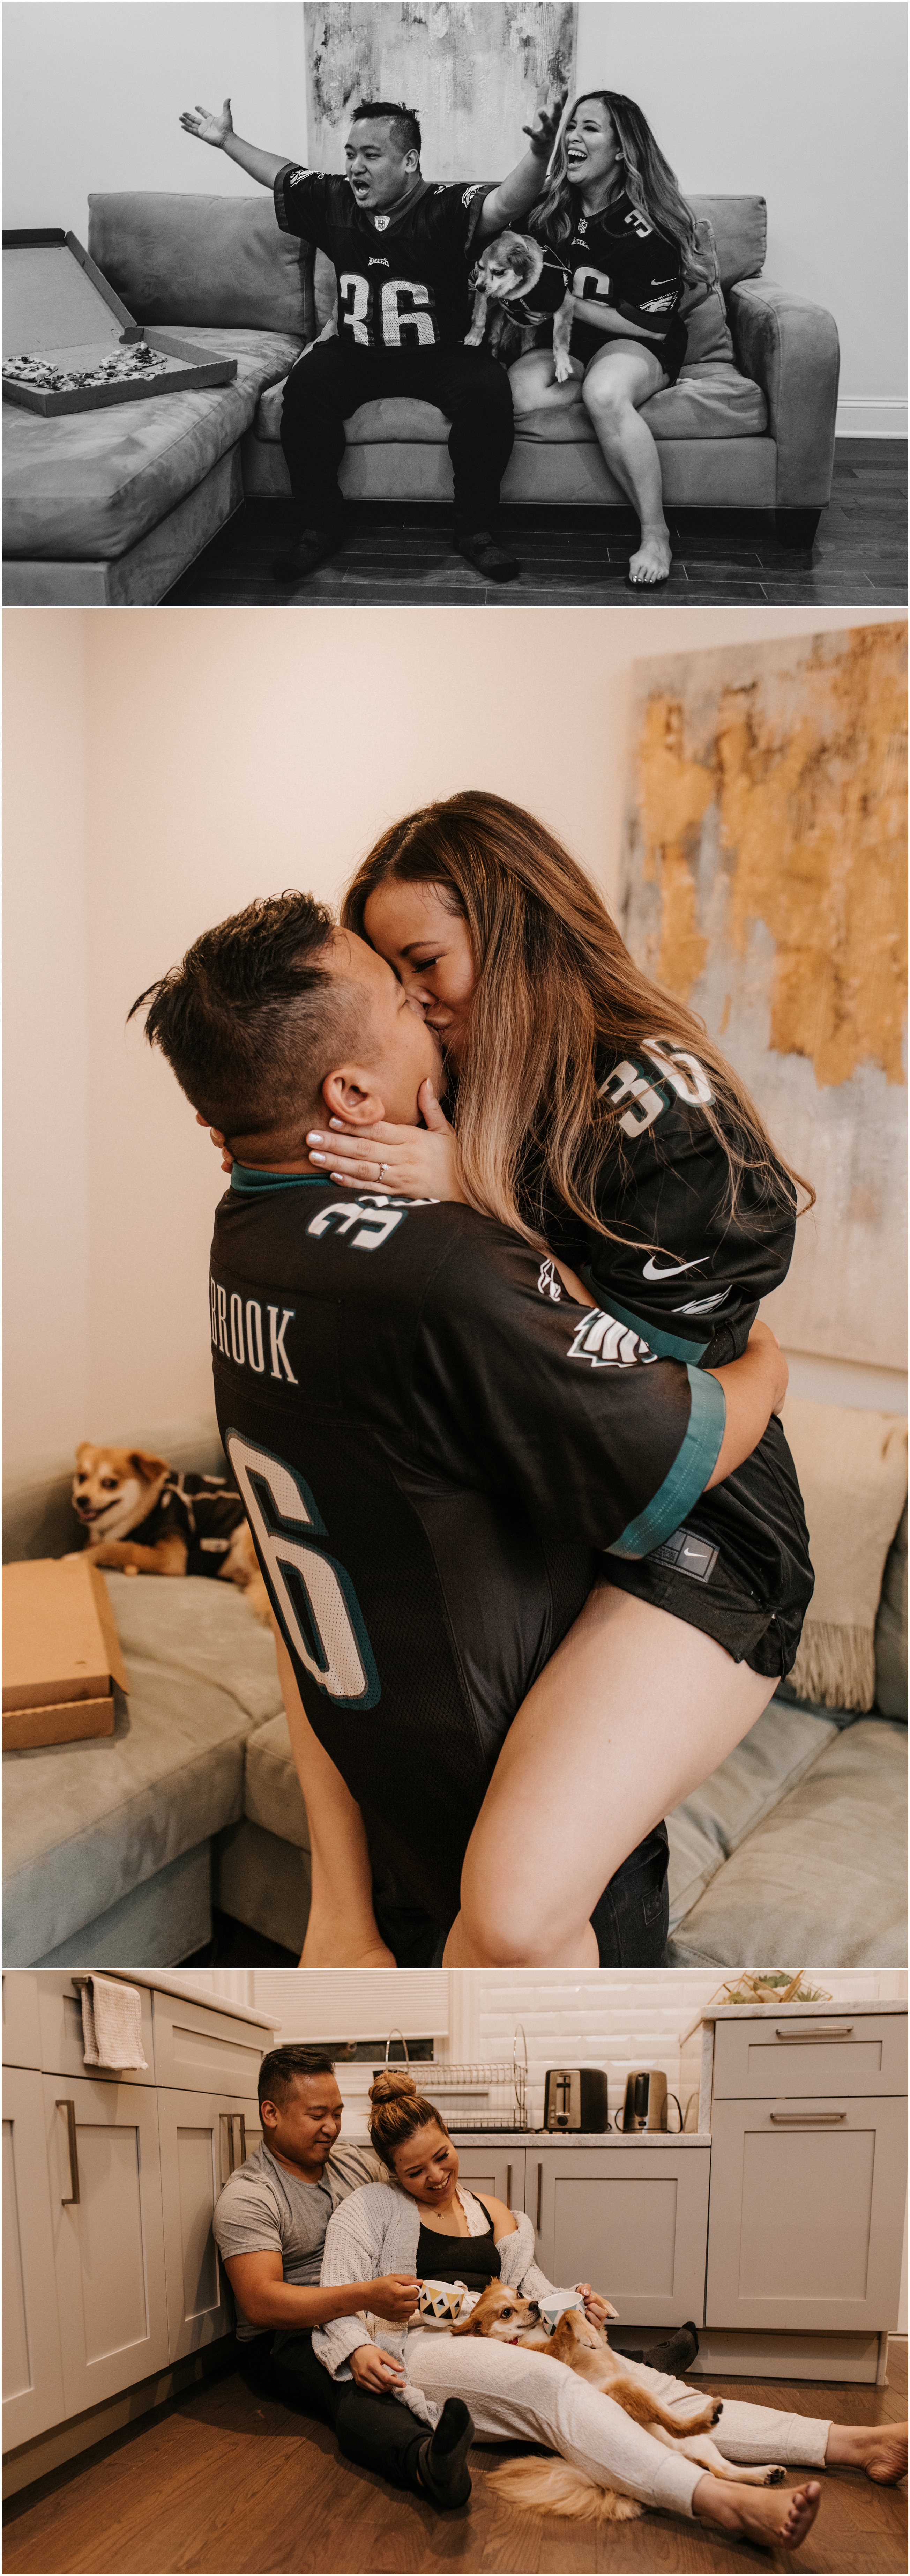 couple kissing in eagles jerseys